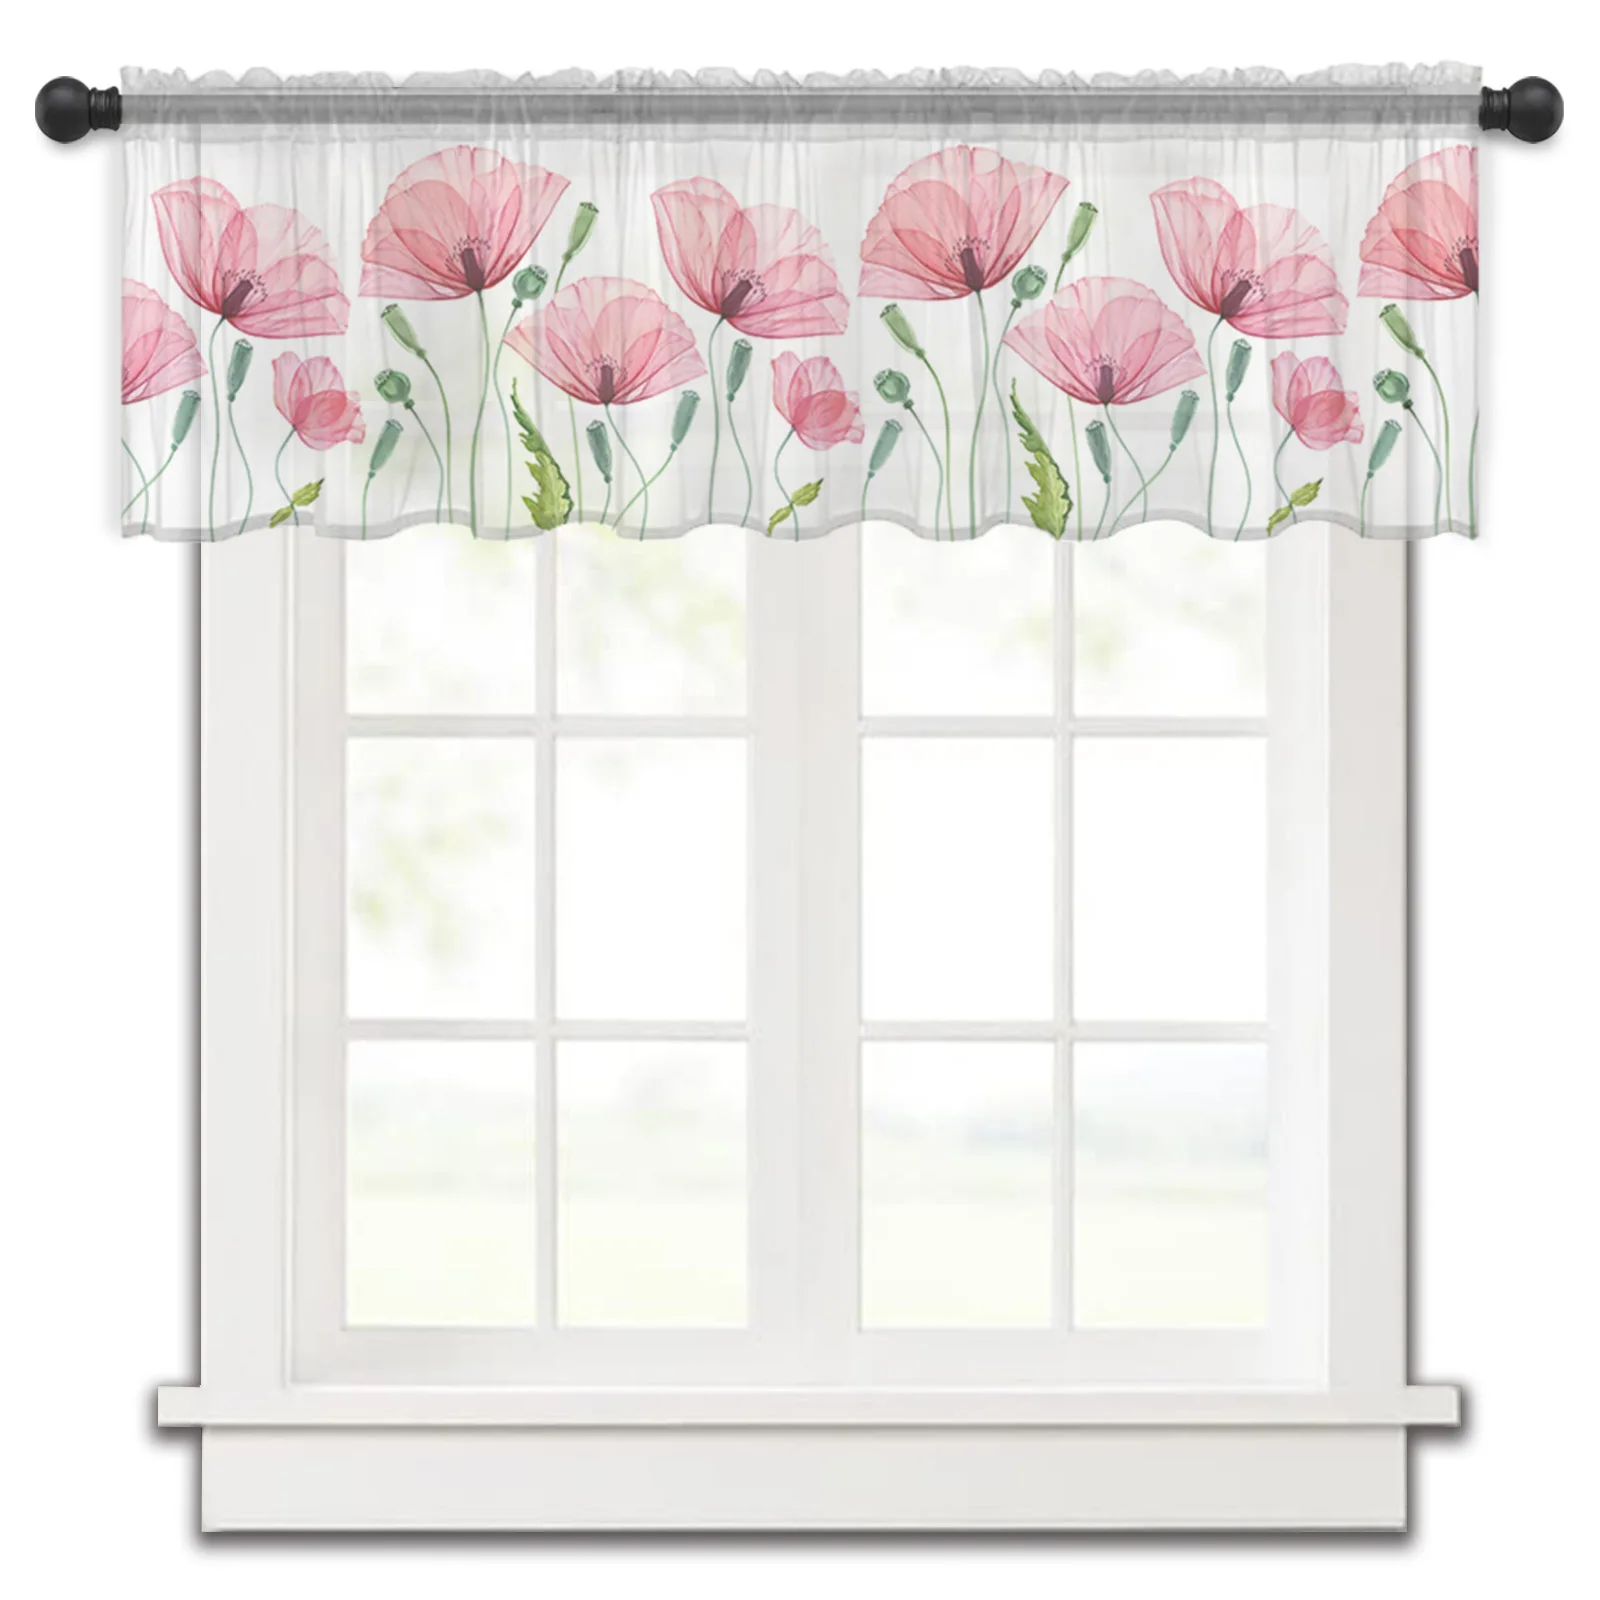 

Poppy Flower Plant Tulle Kitchen Small Window Curtain Valance Sheer Short Curtain Bedroom Living Room Home Decor Voile Drapes